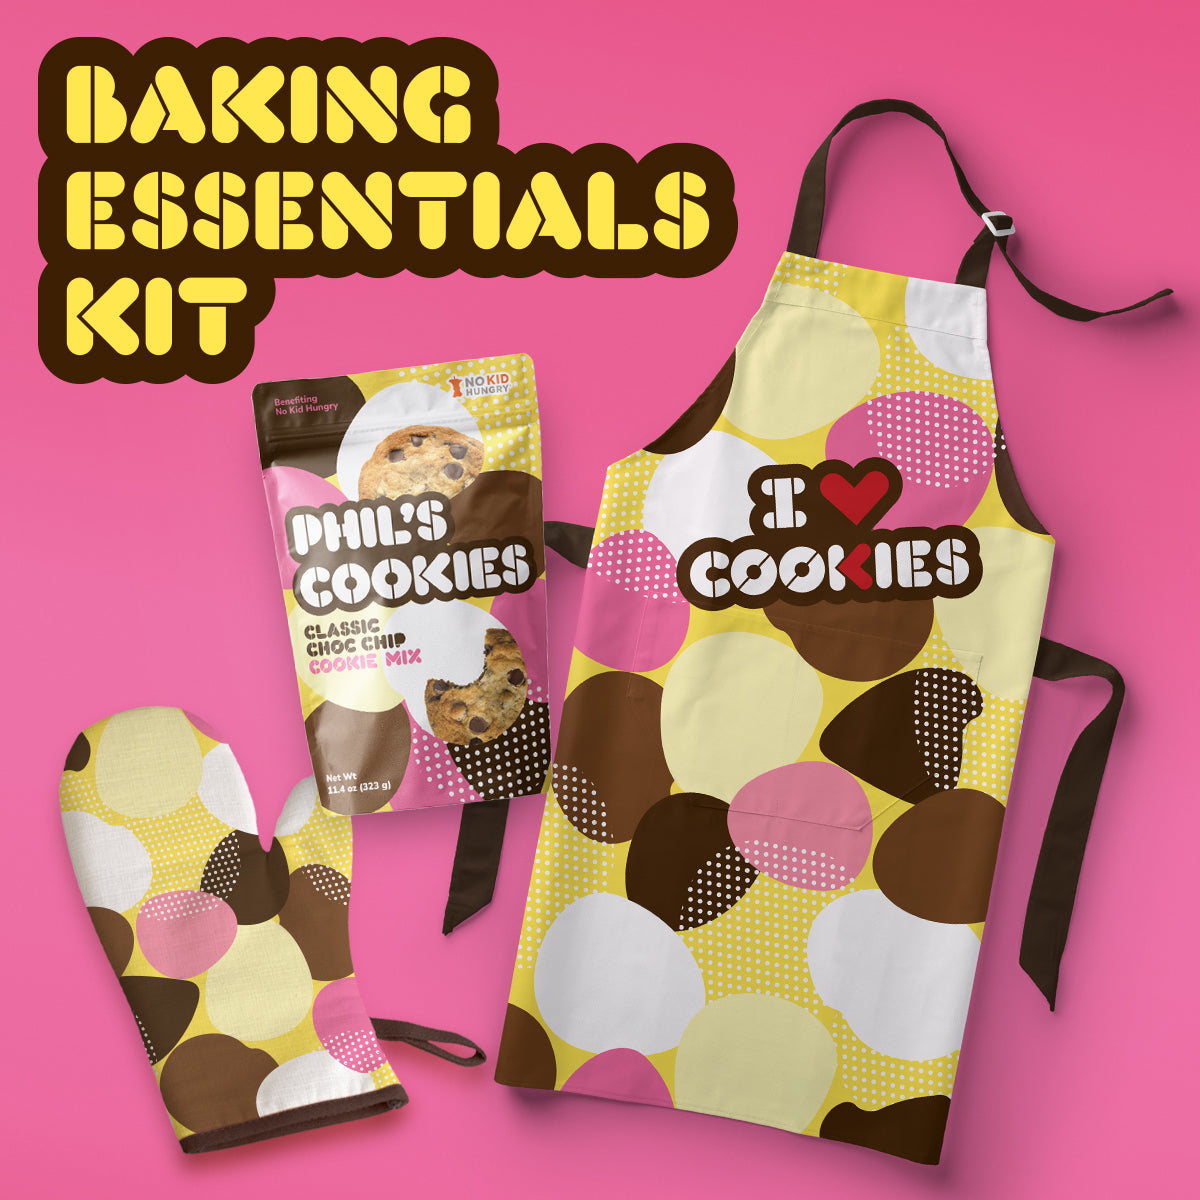 Baking Gear for Baking Cookies: The Essentials